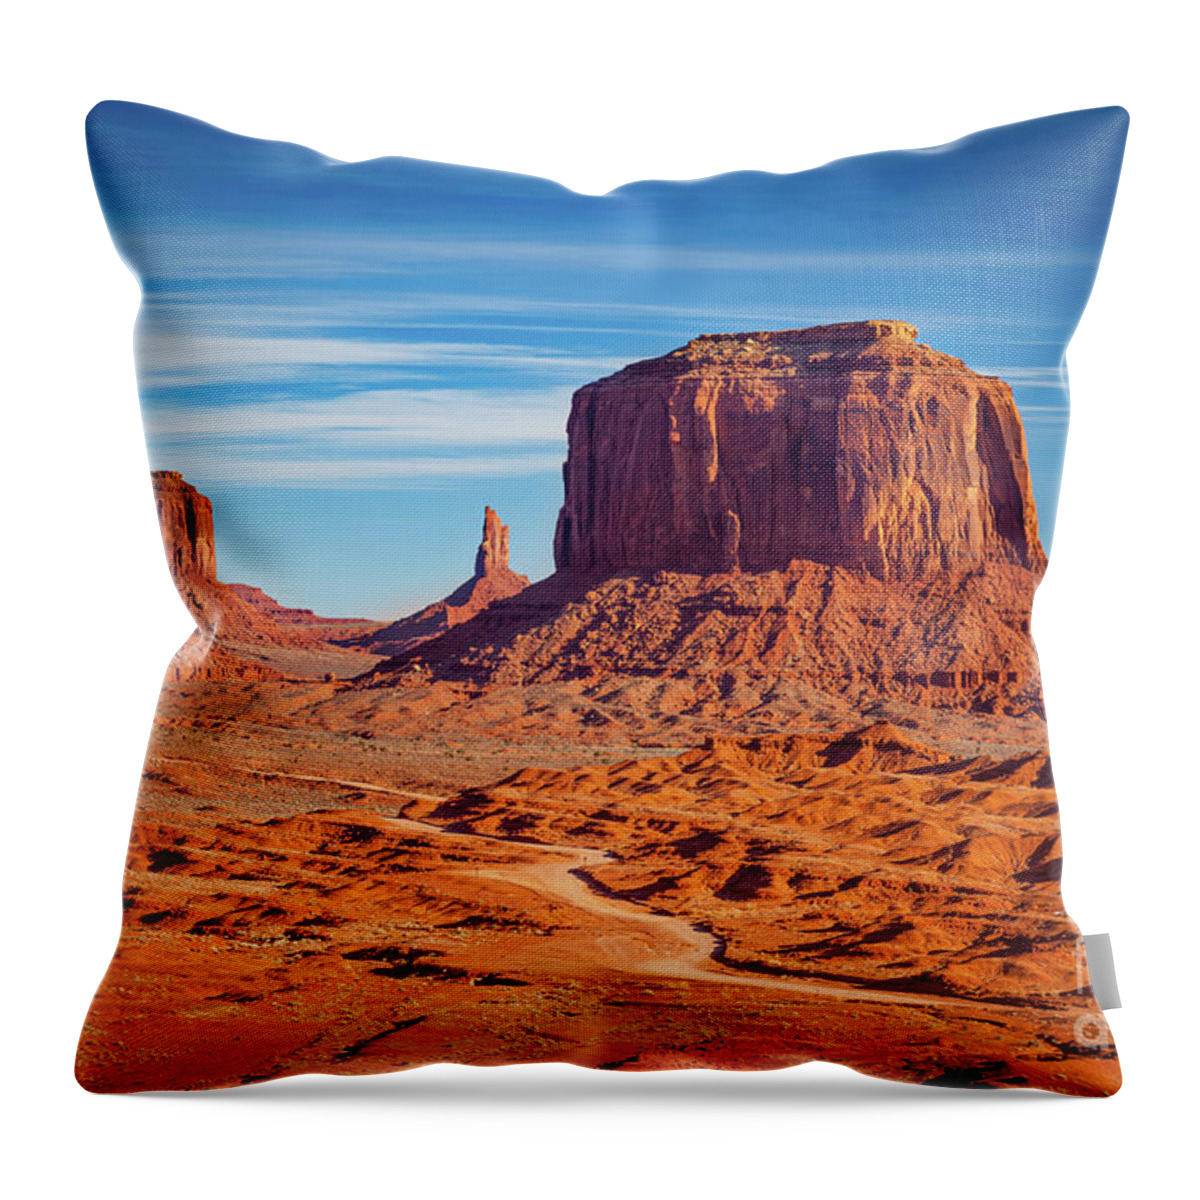 Monument Valley Throw Pillow featuring the photograph John Ford Point View - Monument Valley by Brian Jannsen